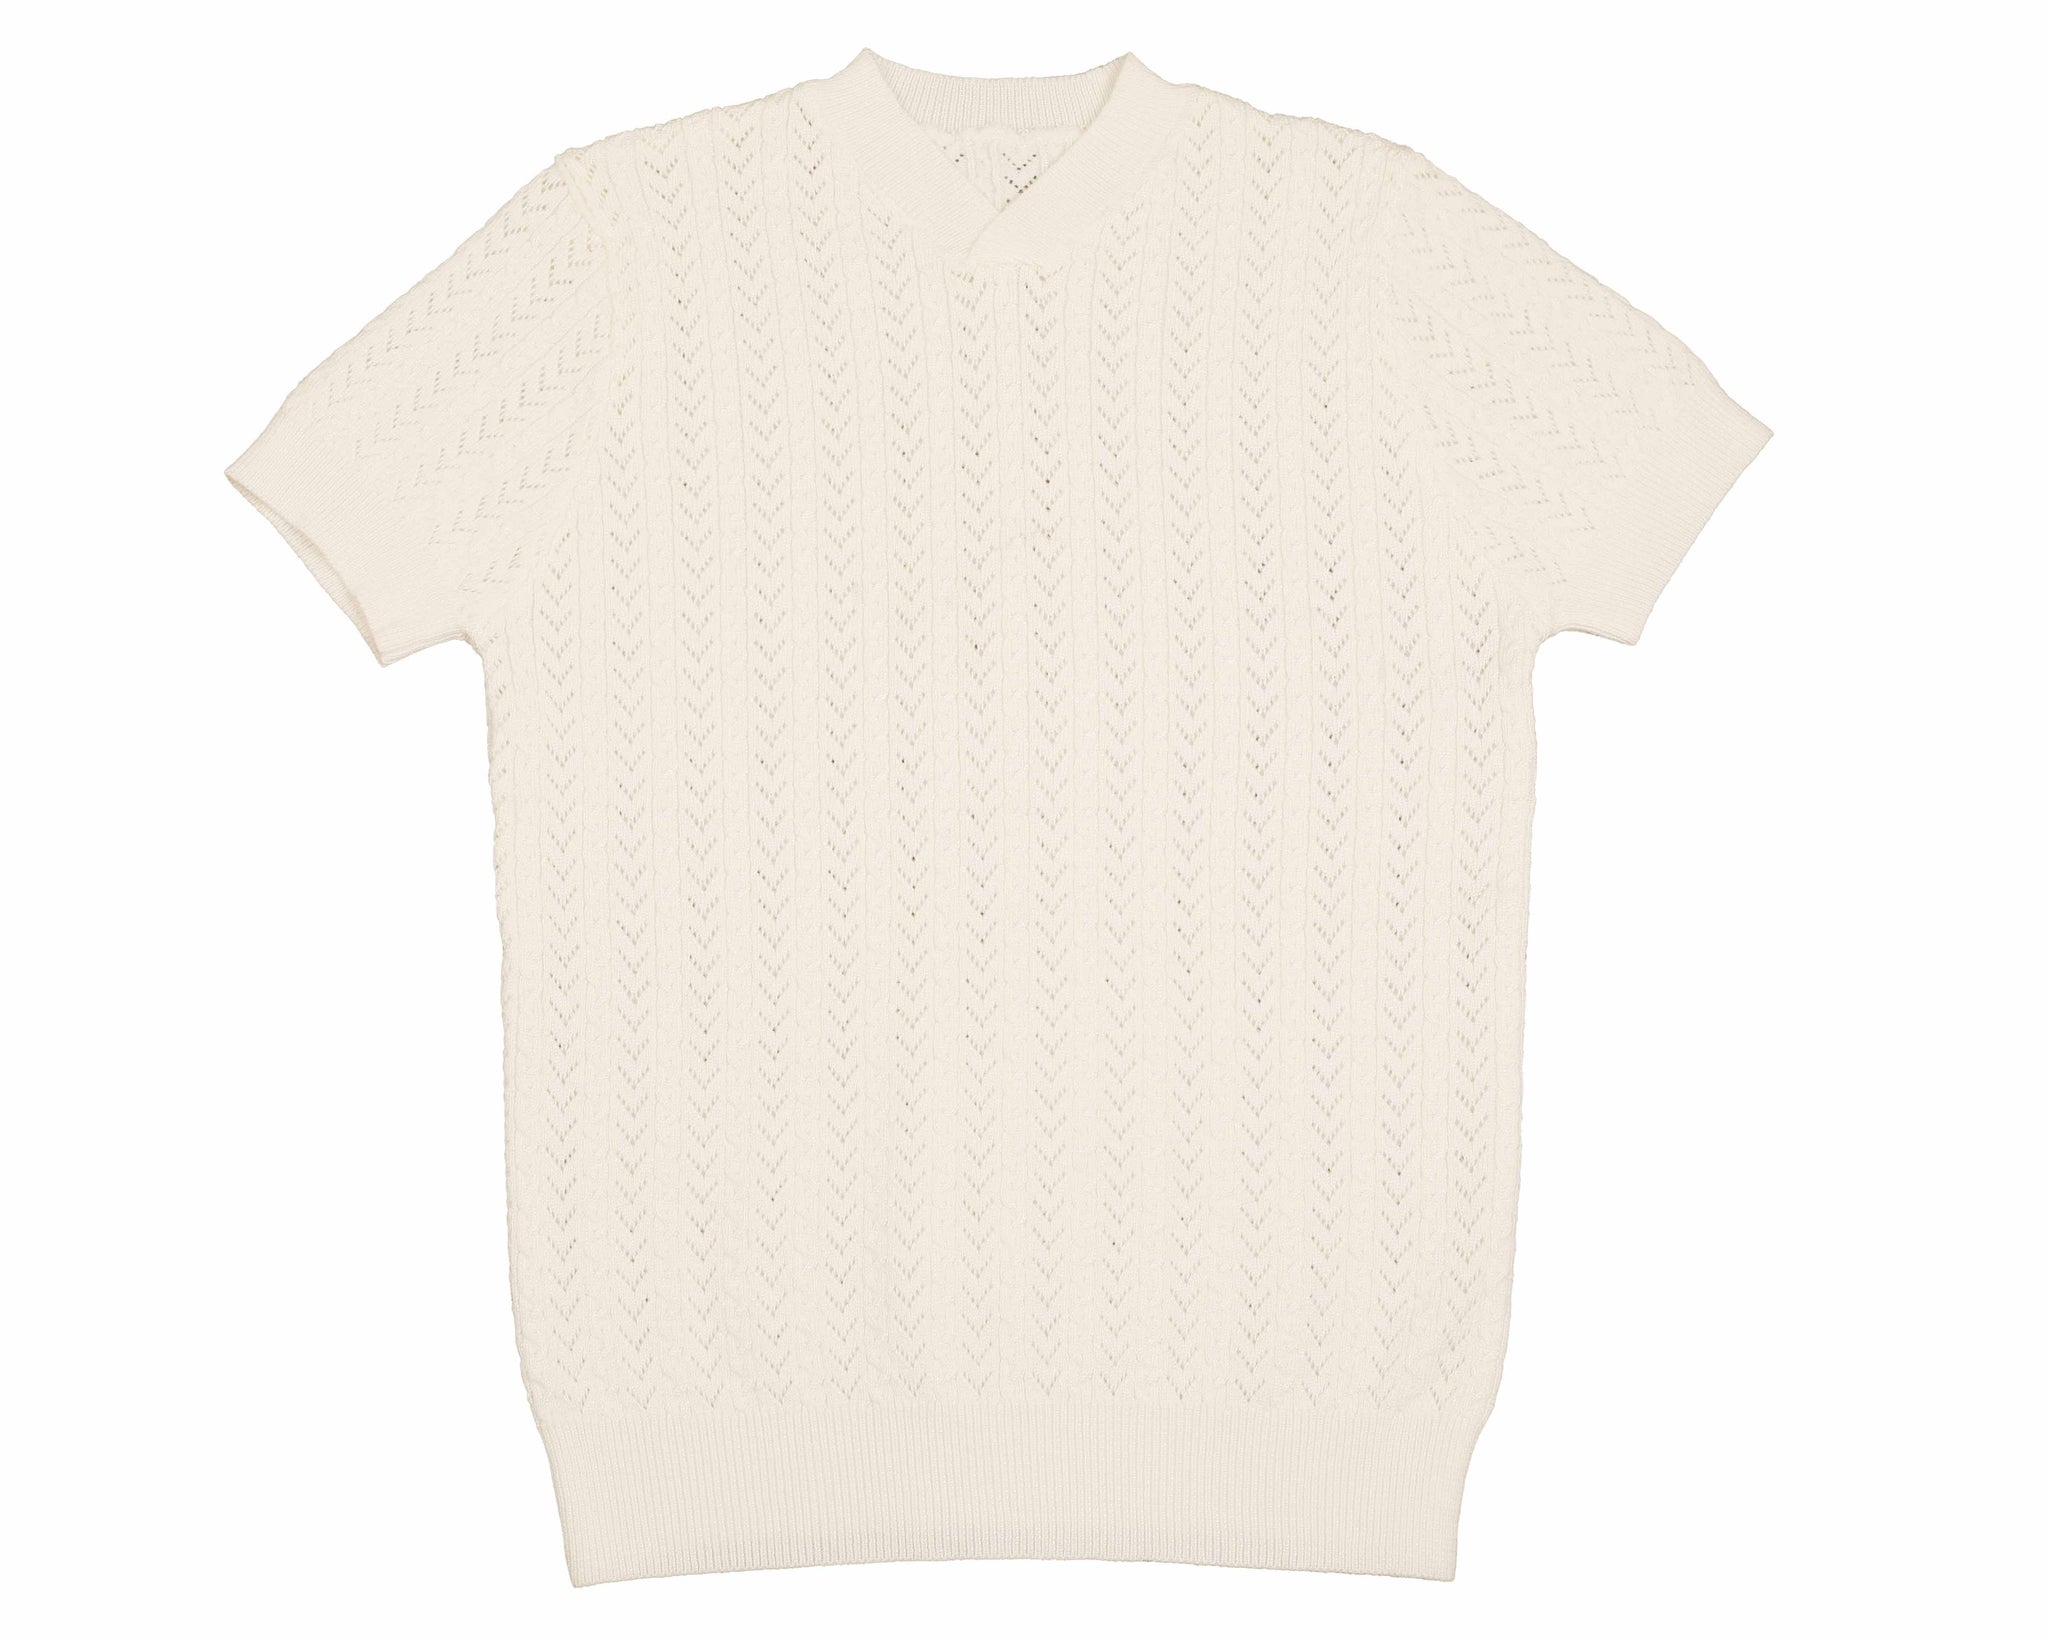 Noma Short Sleeve Pointelle V Neck Knit Top In Ivory For Boys And Girls .